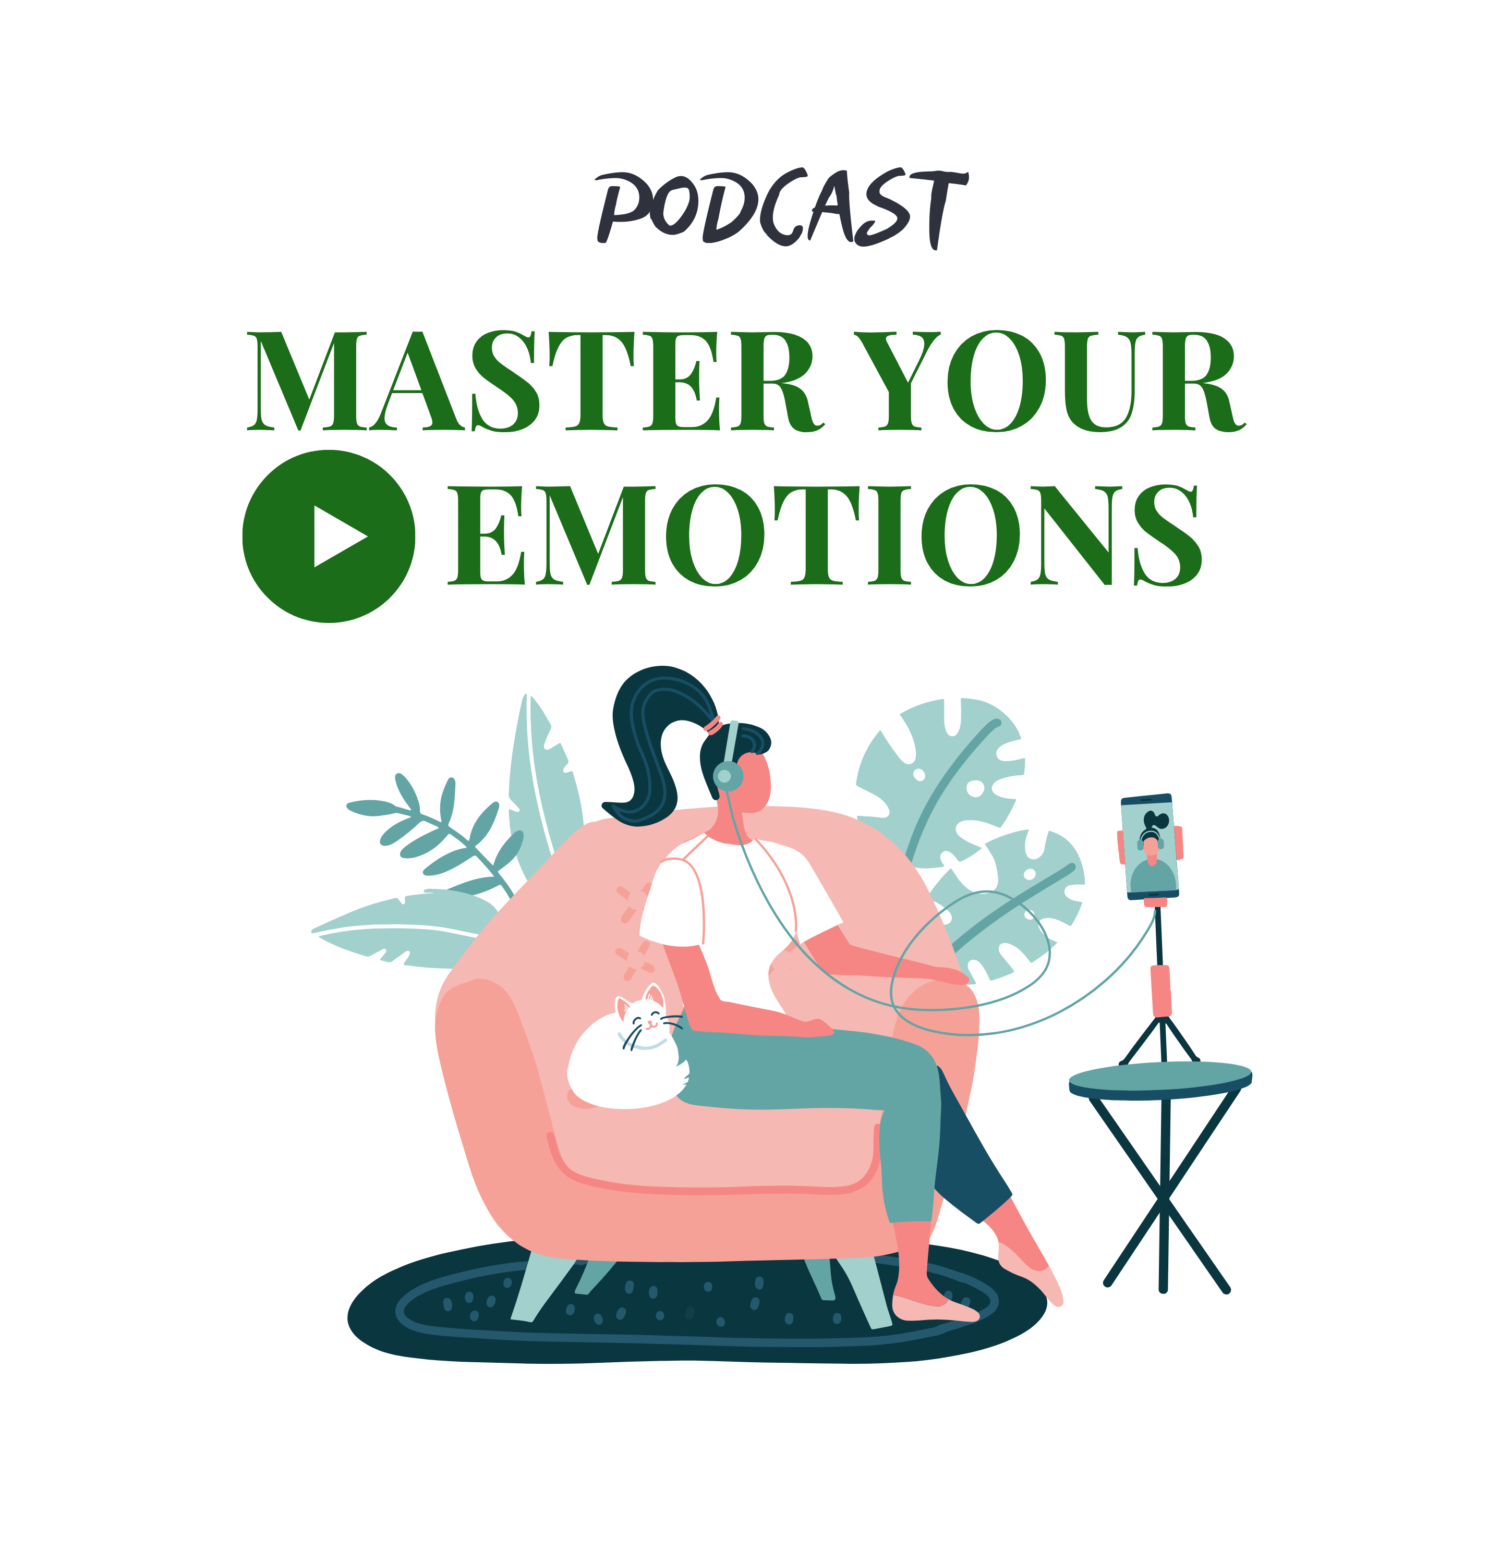 Podcast Master Your Emotions